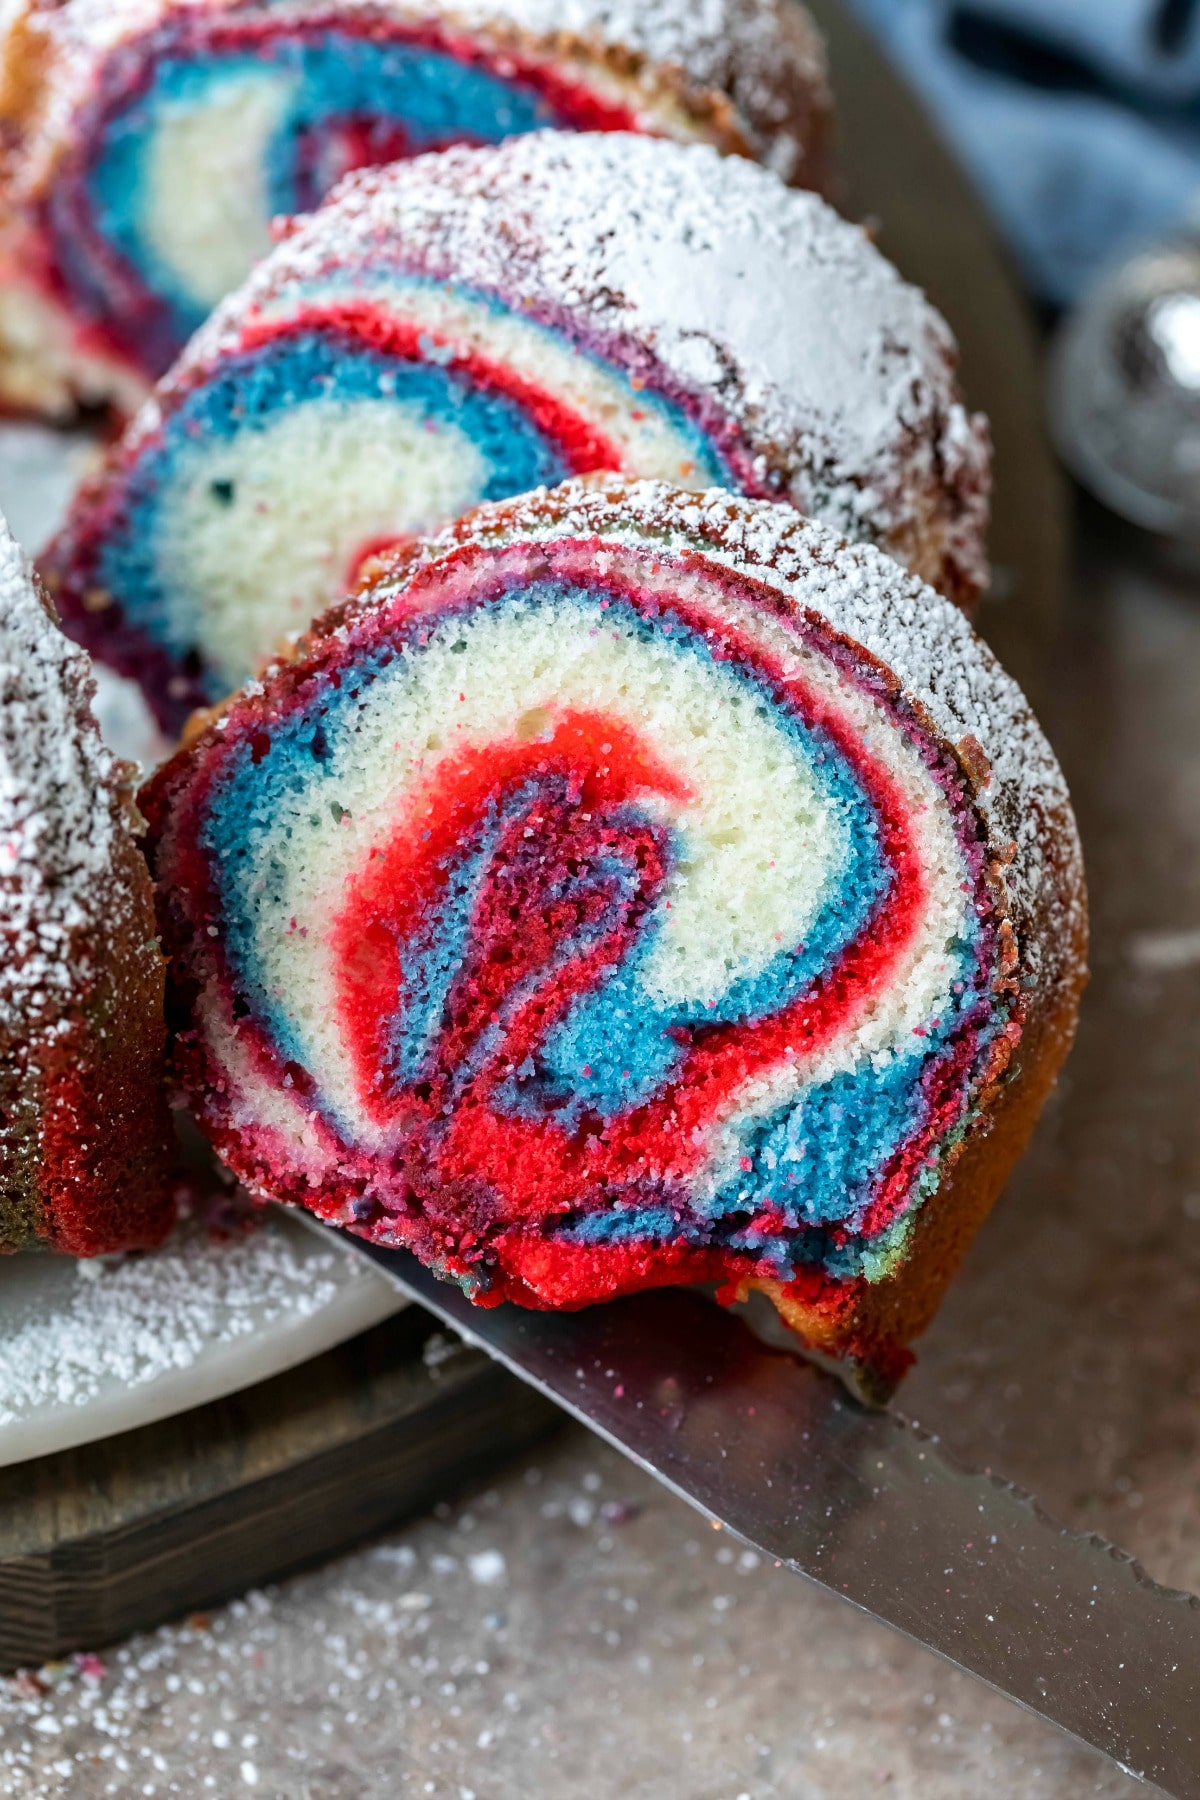 Knife cutting a slice of red, white, and blue marble cake